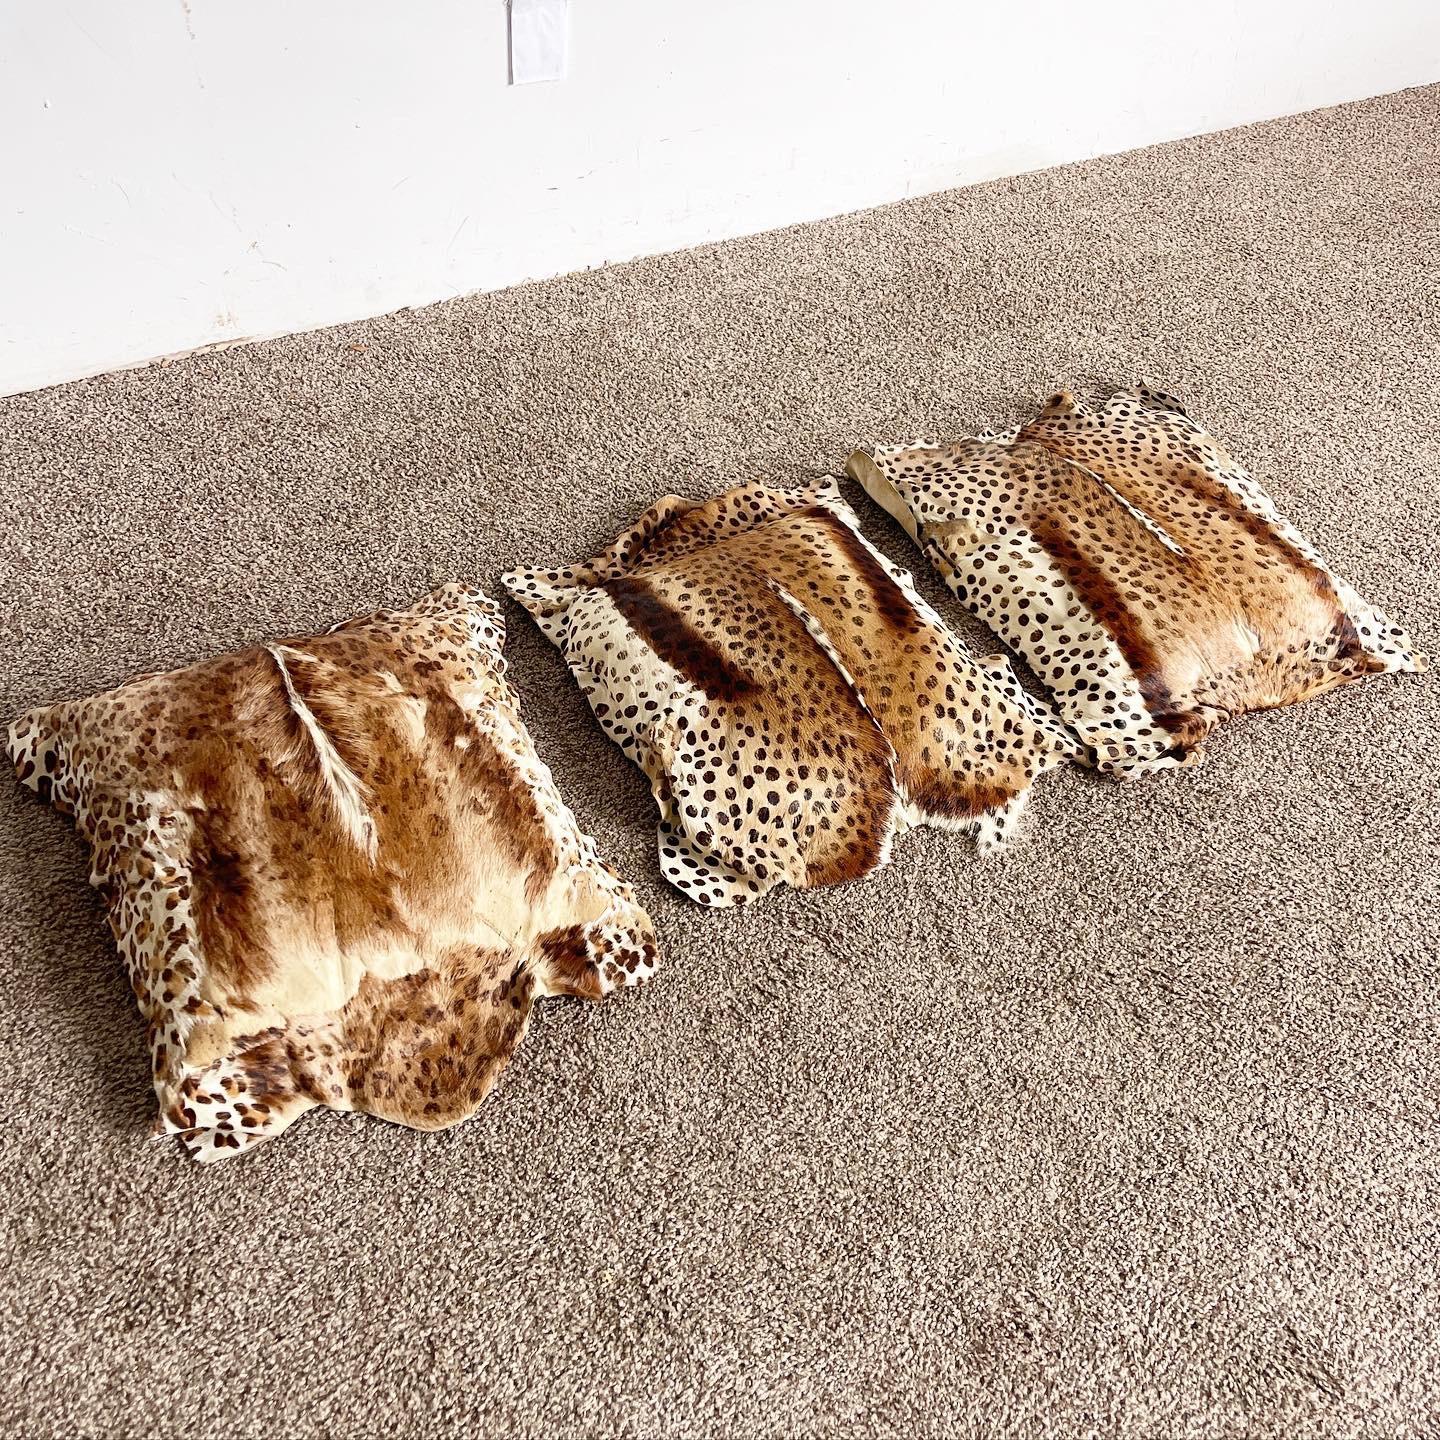 Add a wild touch to your home with the Goat Skin Square Pillows in Leopard Print - a set of 3 plush pillows that combine style and comfort.

Set of 3 Goat Skin Square Pillows in Leopard Print for a bold statement.
Soft and comfortable materials made